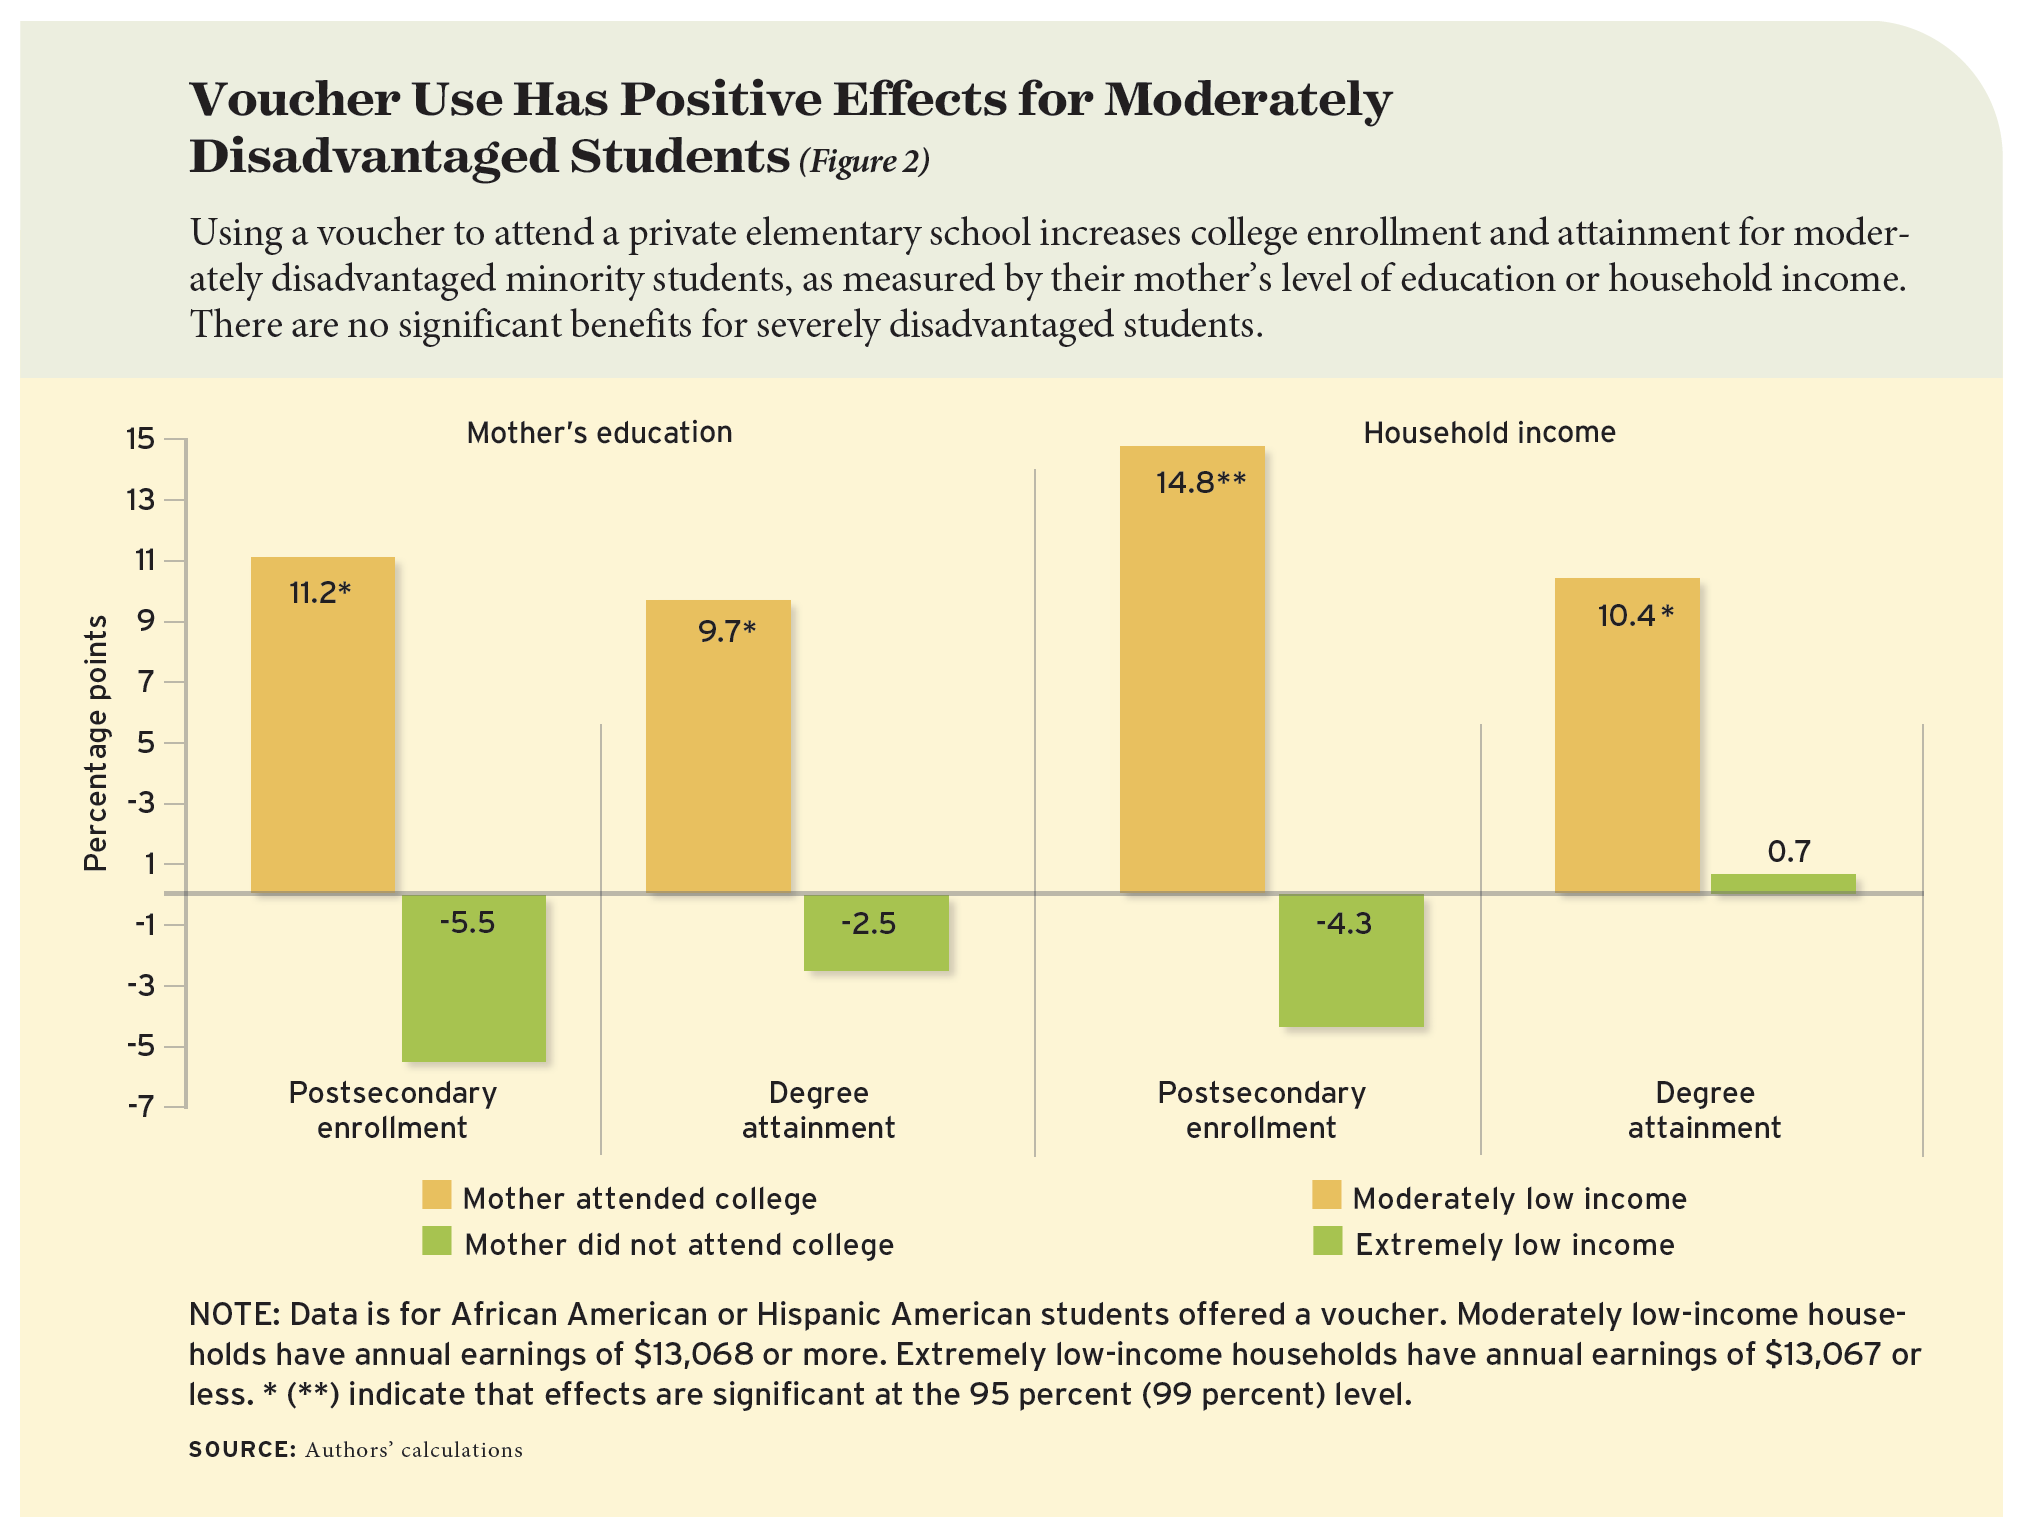 Figure: Voucher Use Has Positive Effects for Moderately Disadvantaged Students. 

Using a voucher to attend a private elementary school increases college enrollment and attainment for moderately disadvantaged minority students, as measured by their mother’s level of education or household income. There are no significant benefits for severely disadvantaged students.